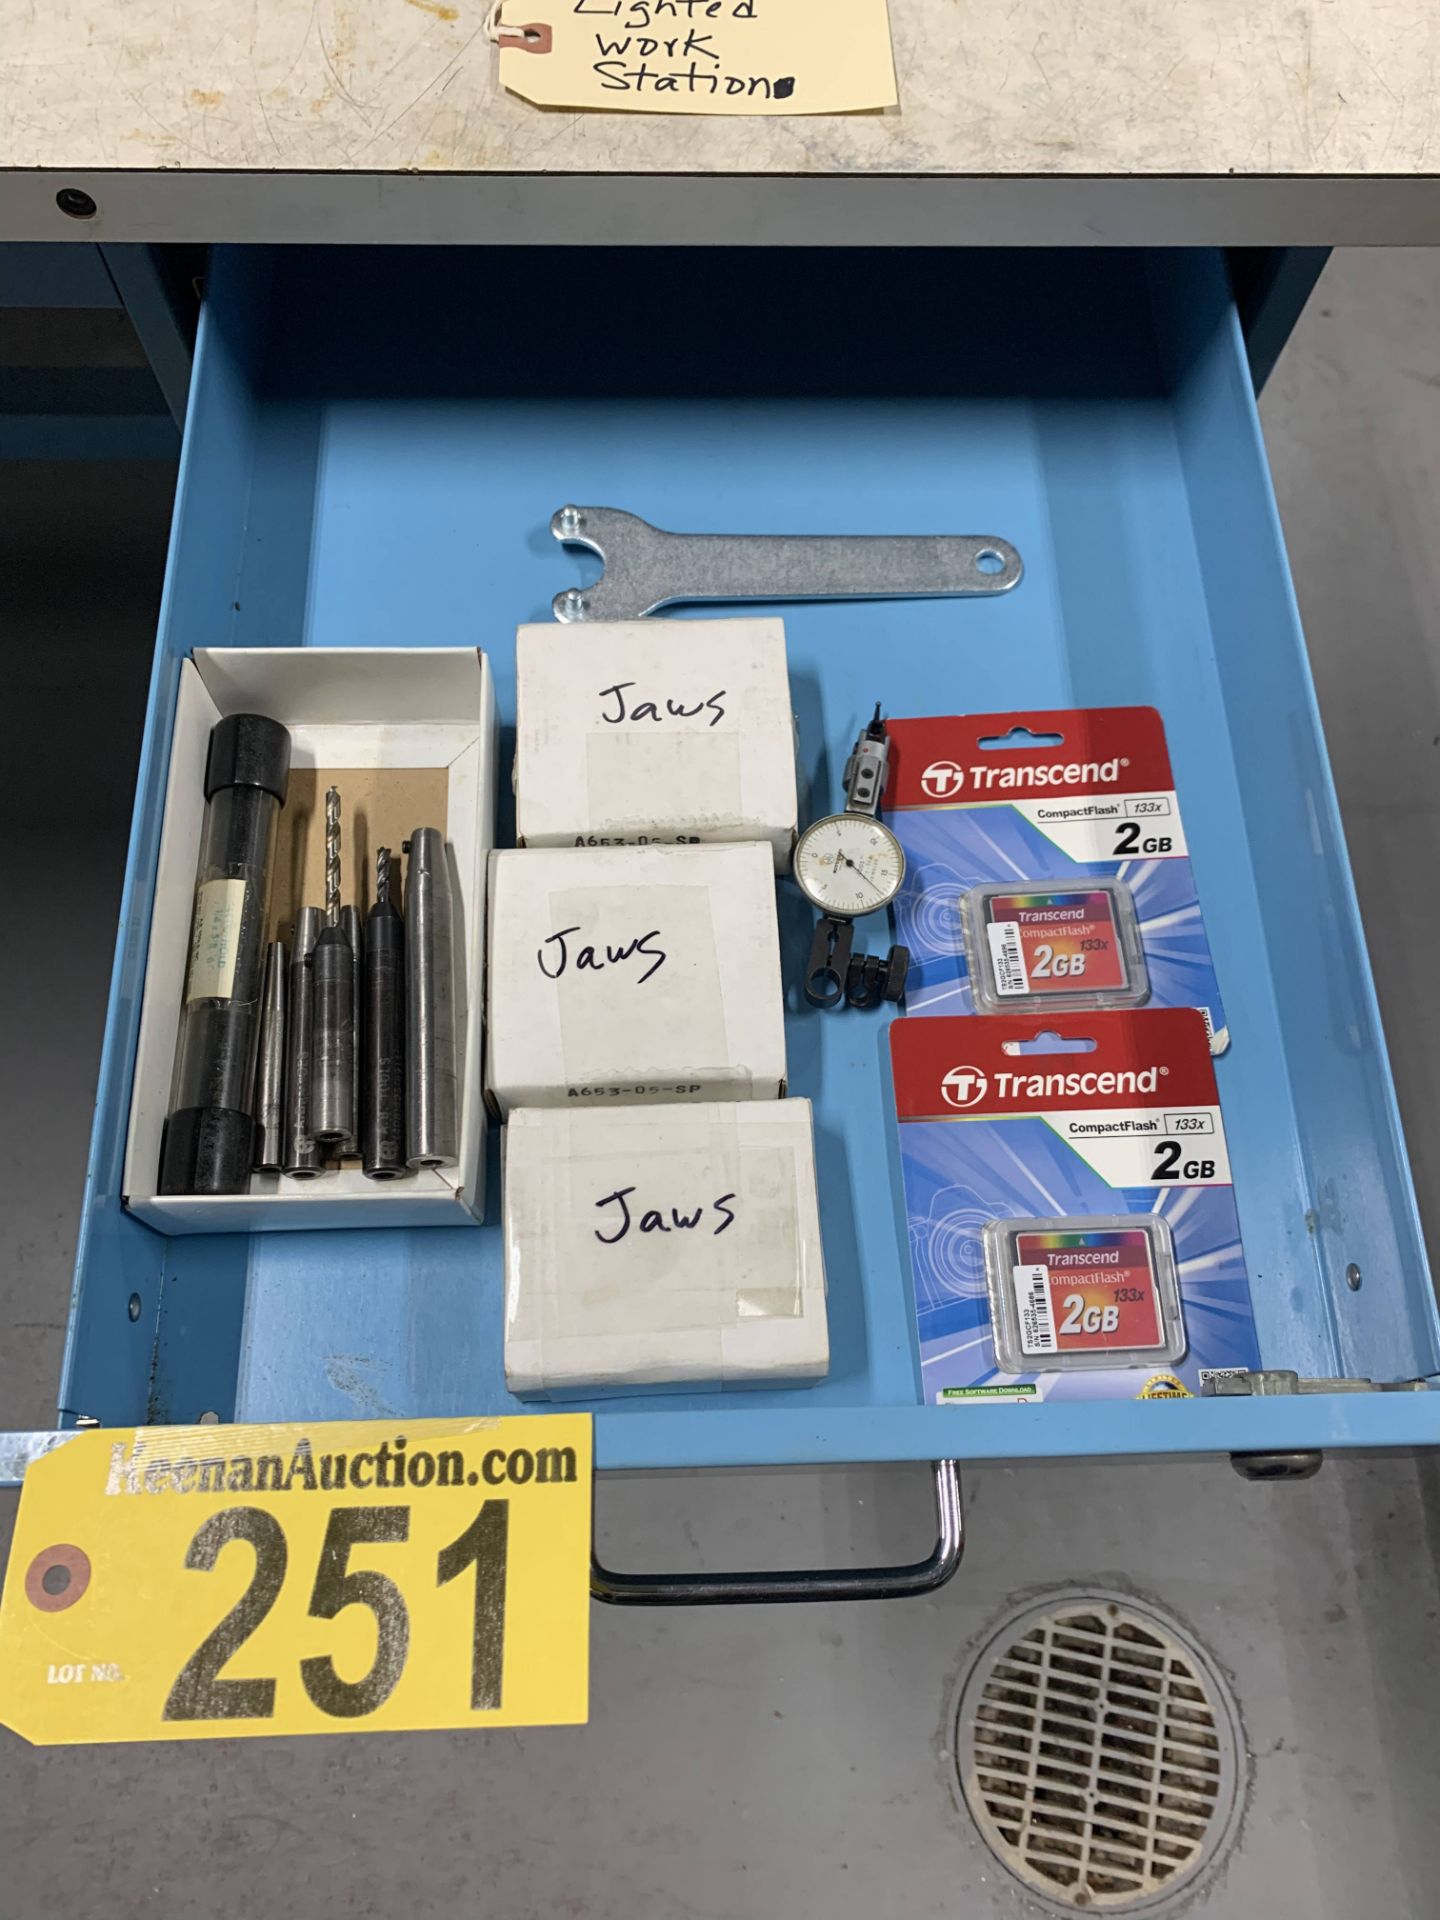 LOT: DIAL INDICATOR, 2GB CARDS, JAWS, DRILLS